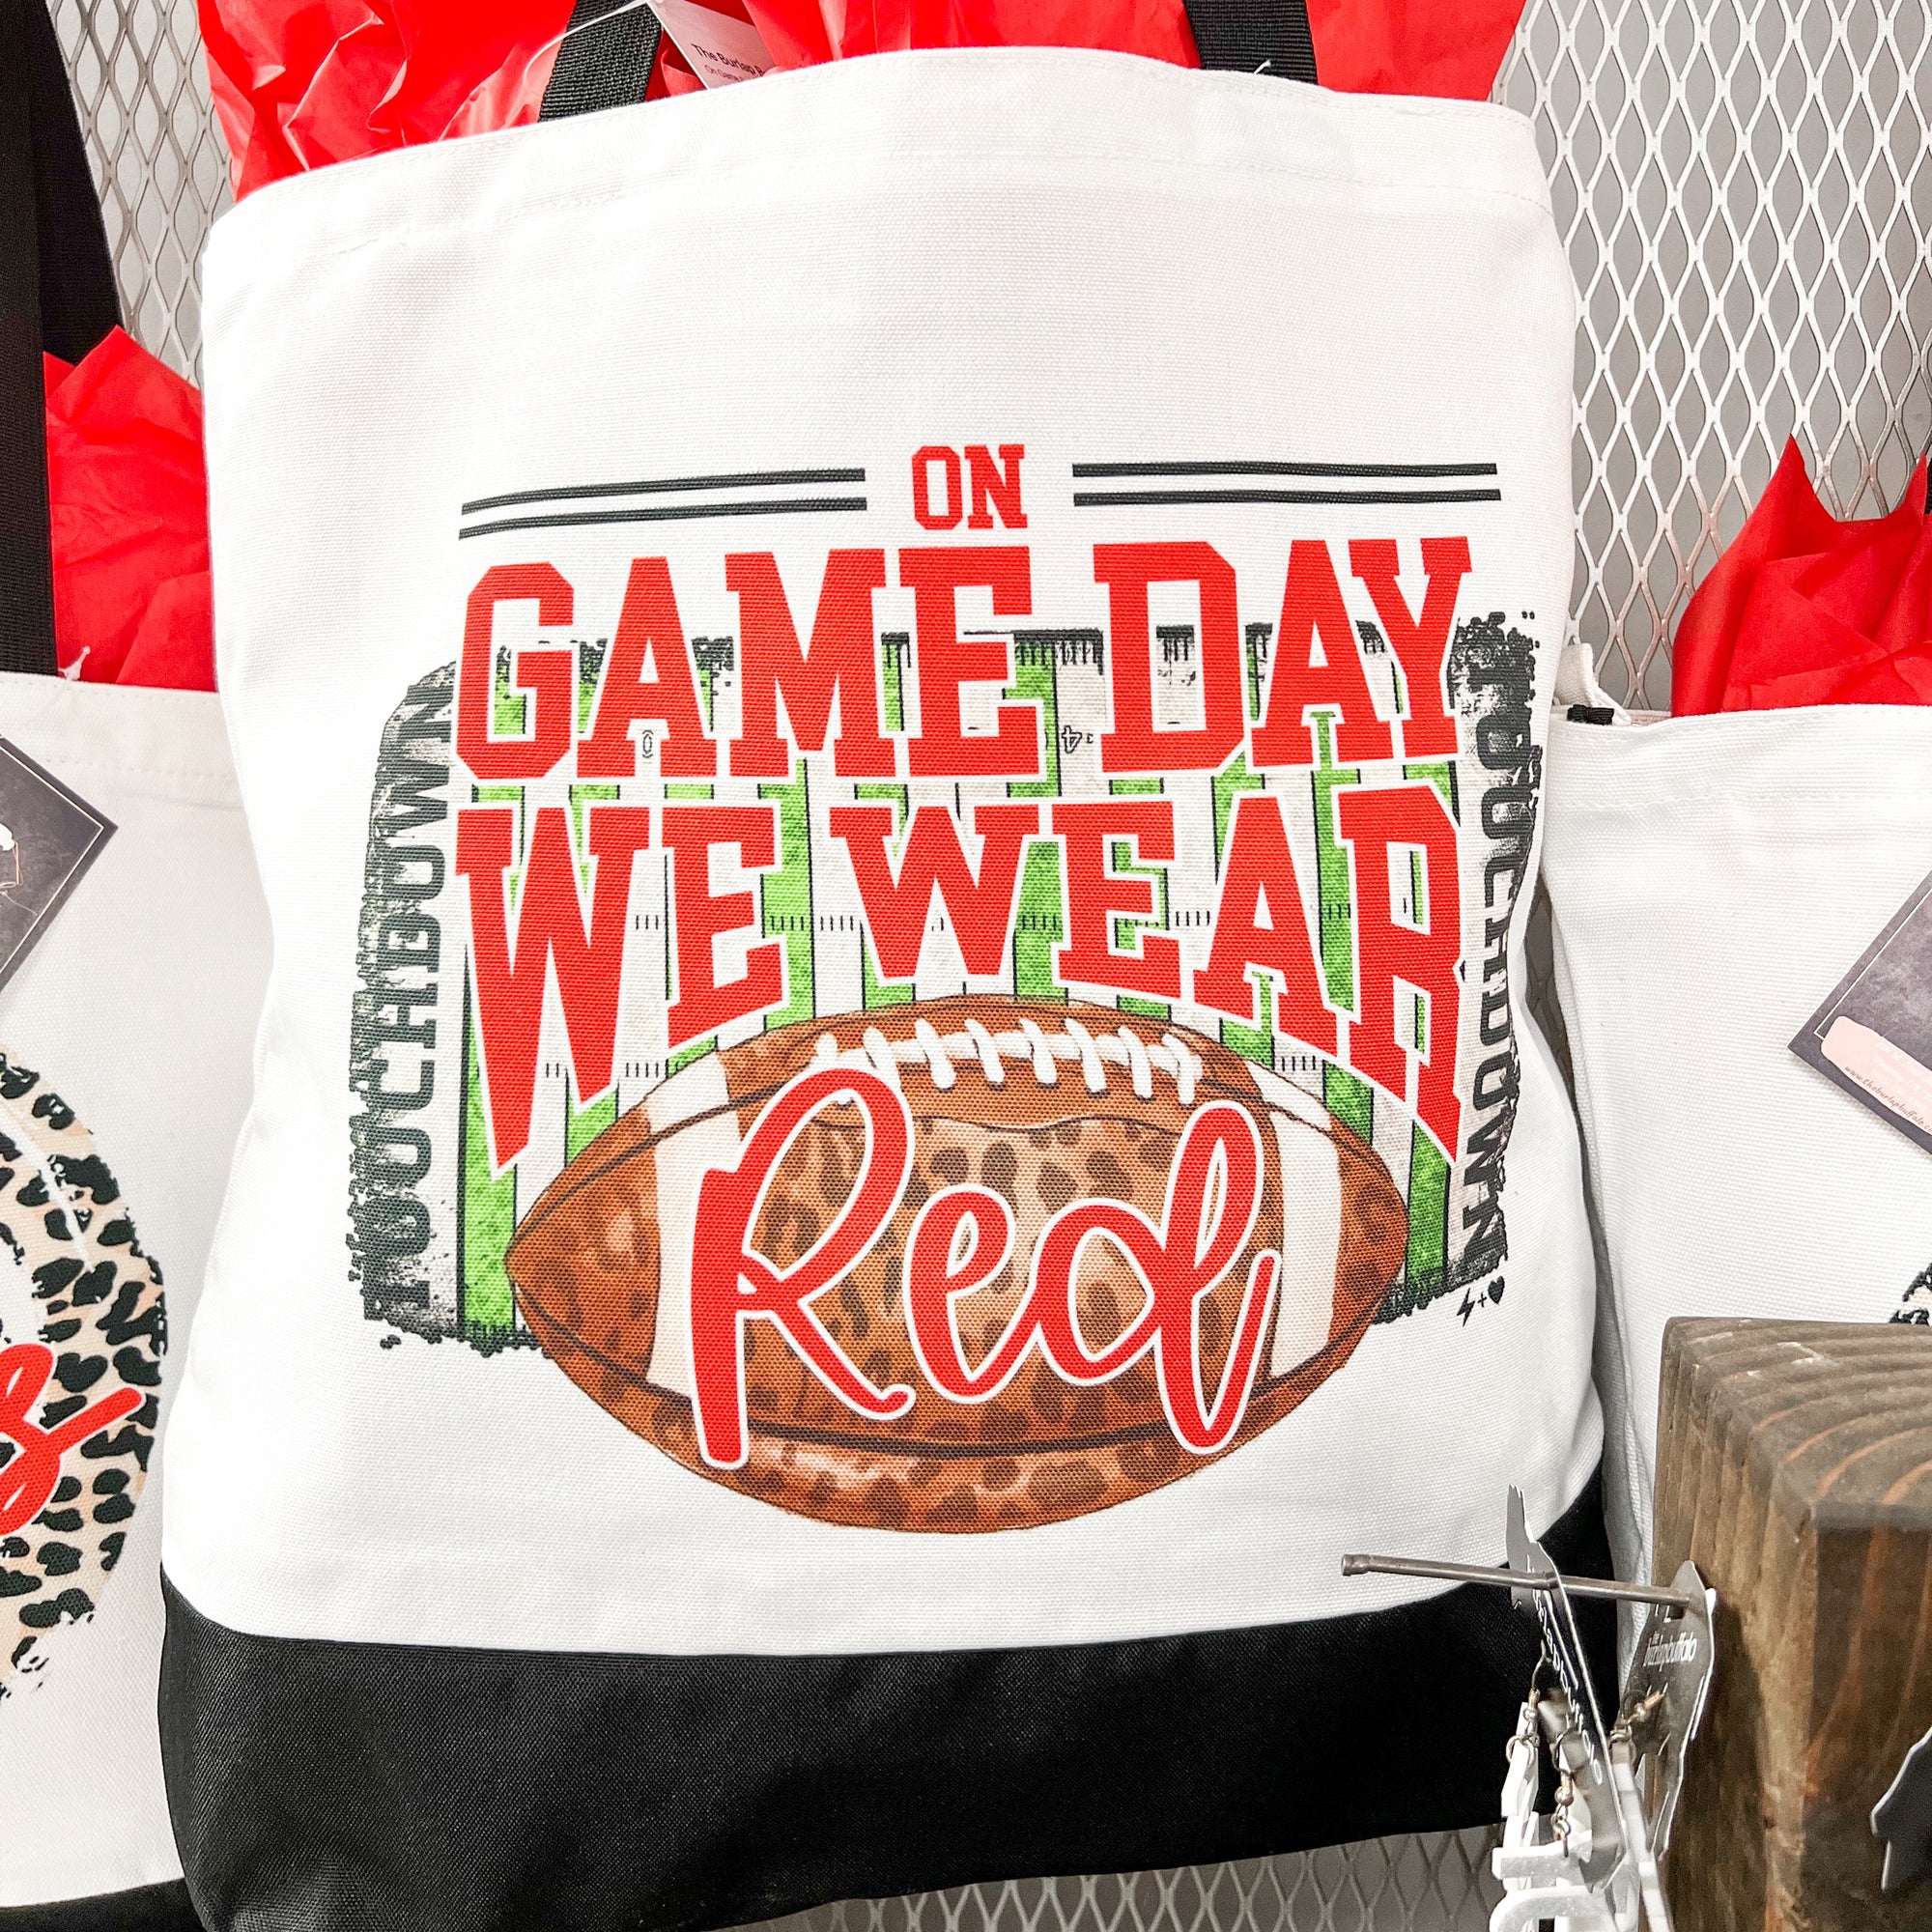 On Game Day We Wear Red Tote Bag